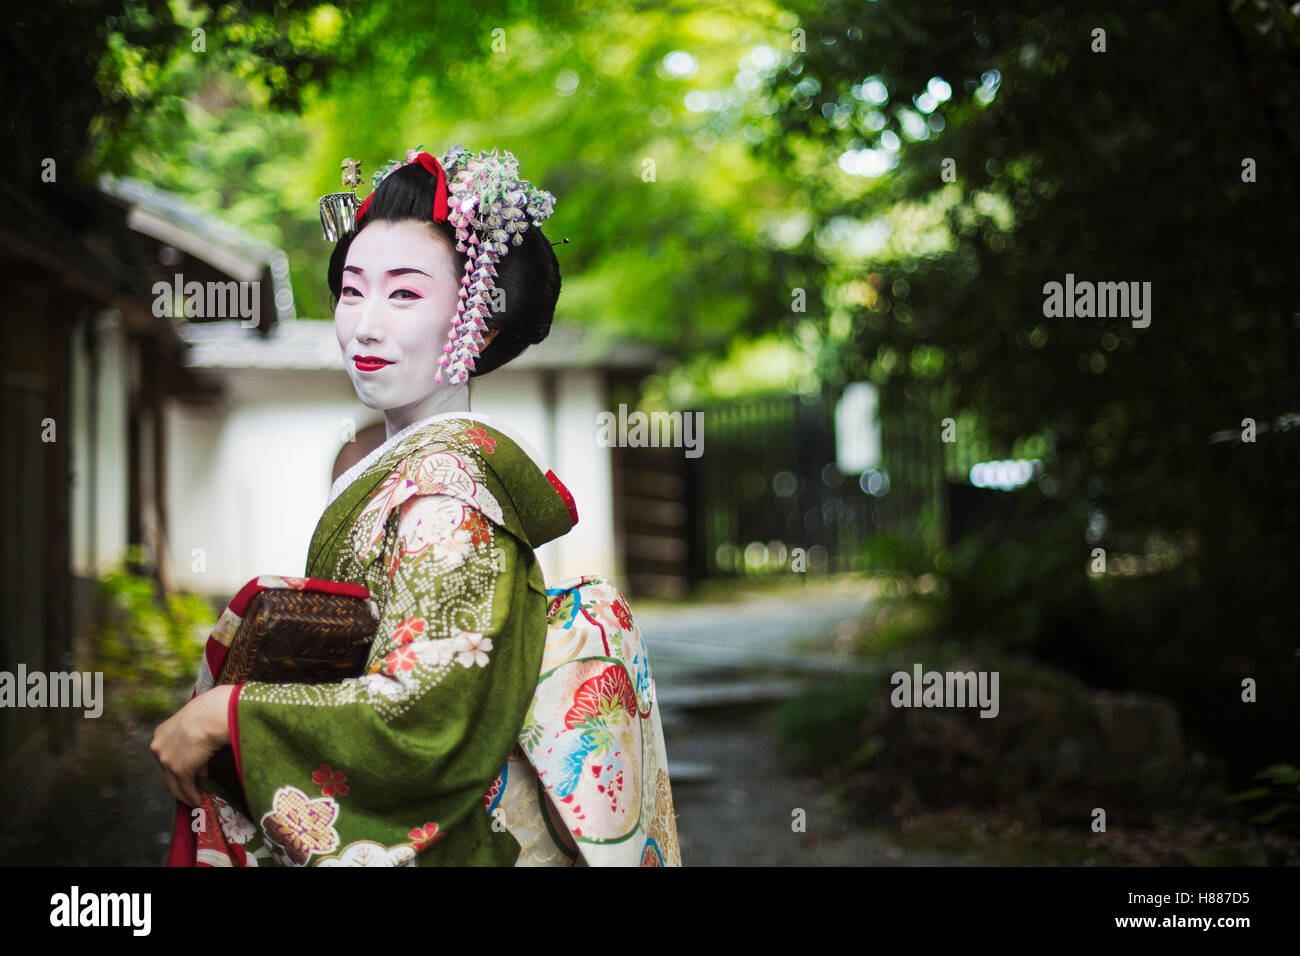 A woman dressed in the traditional geisha style, wearing a kimono and obi, side view outdoors. Stock Photo